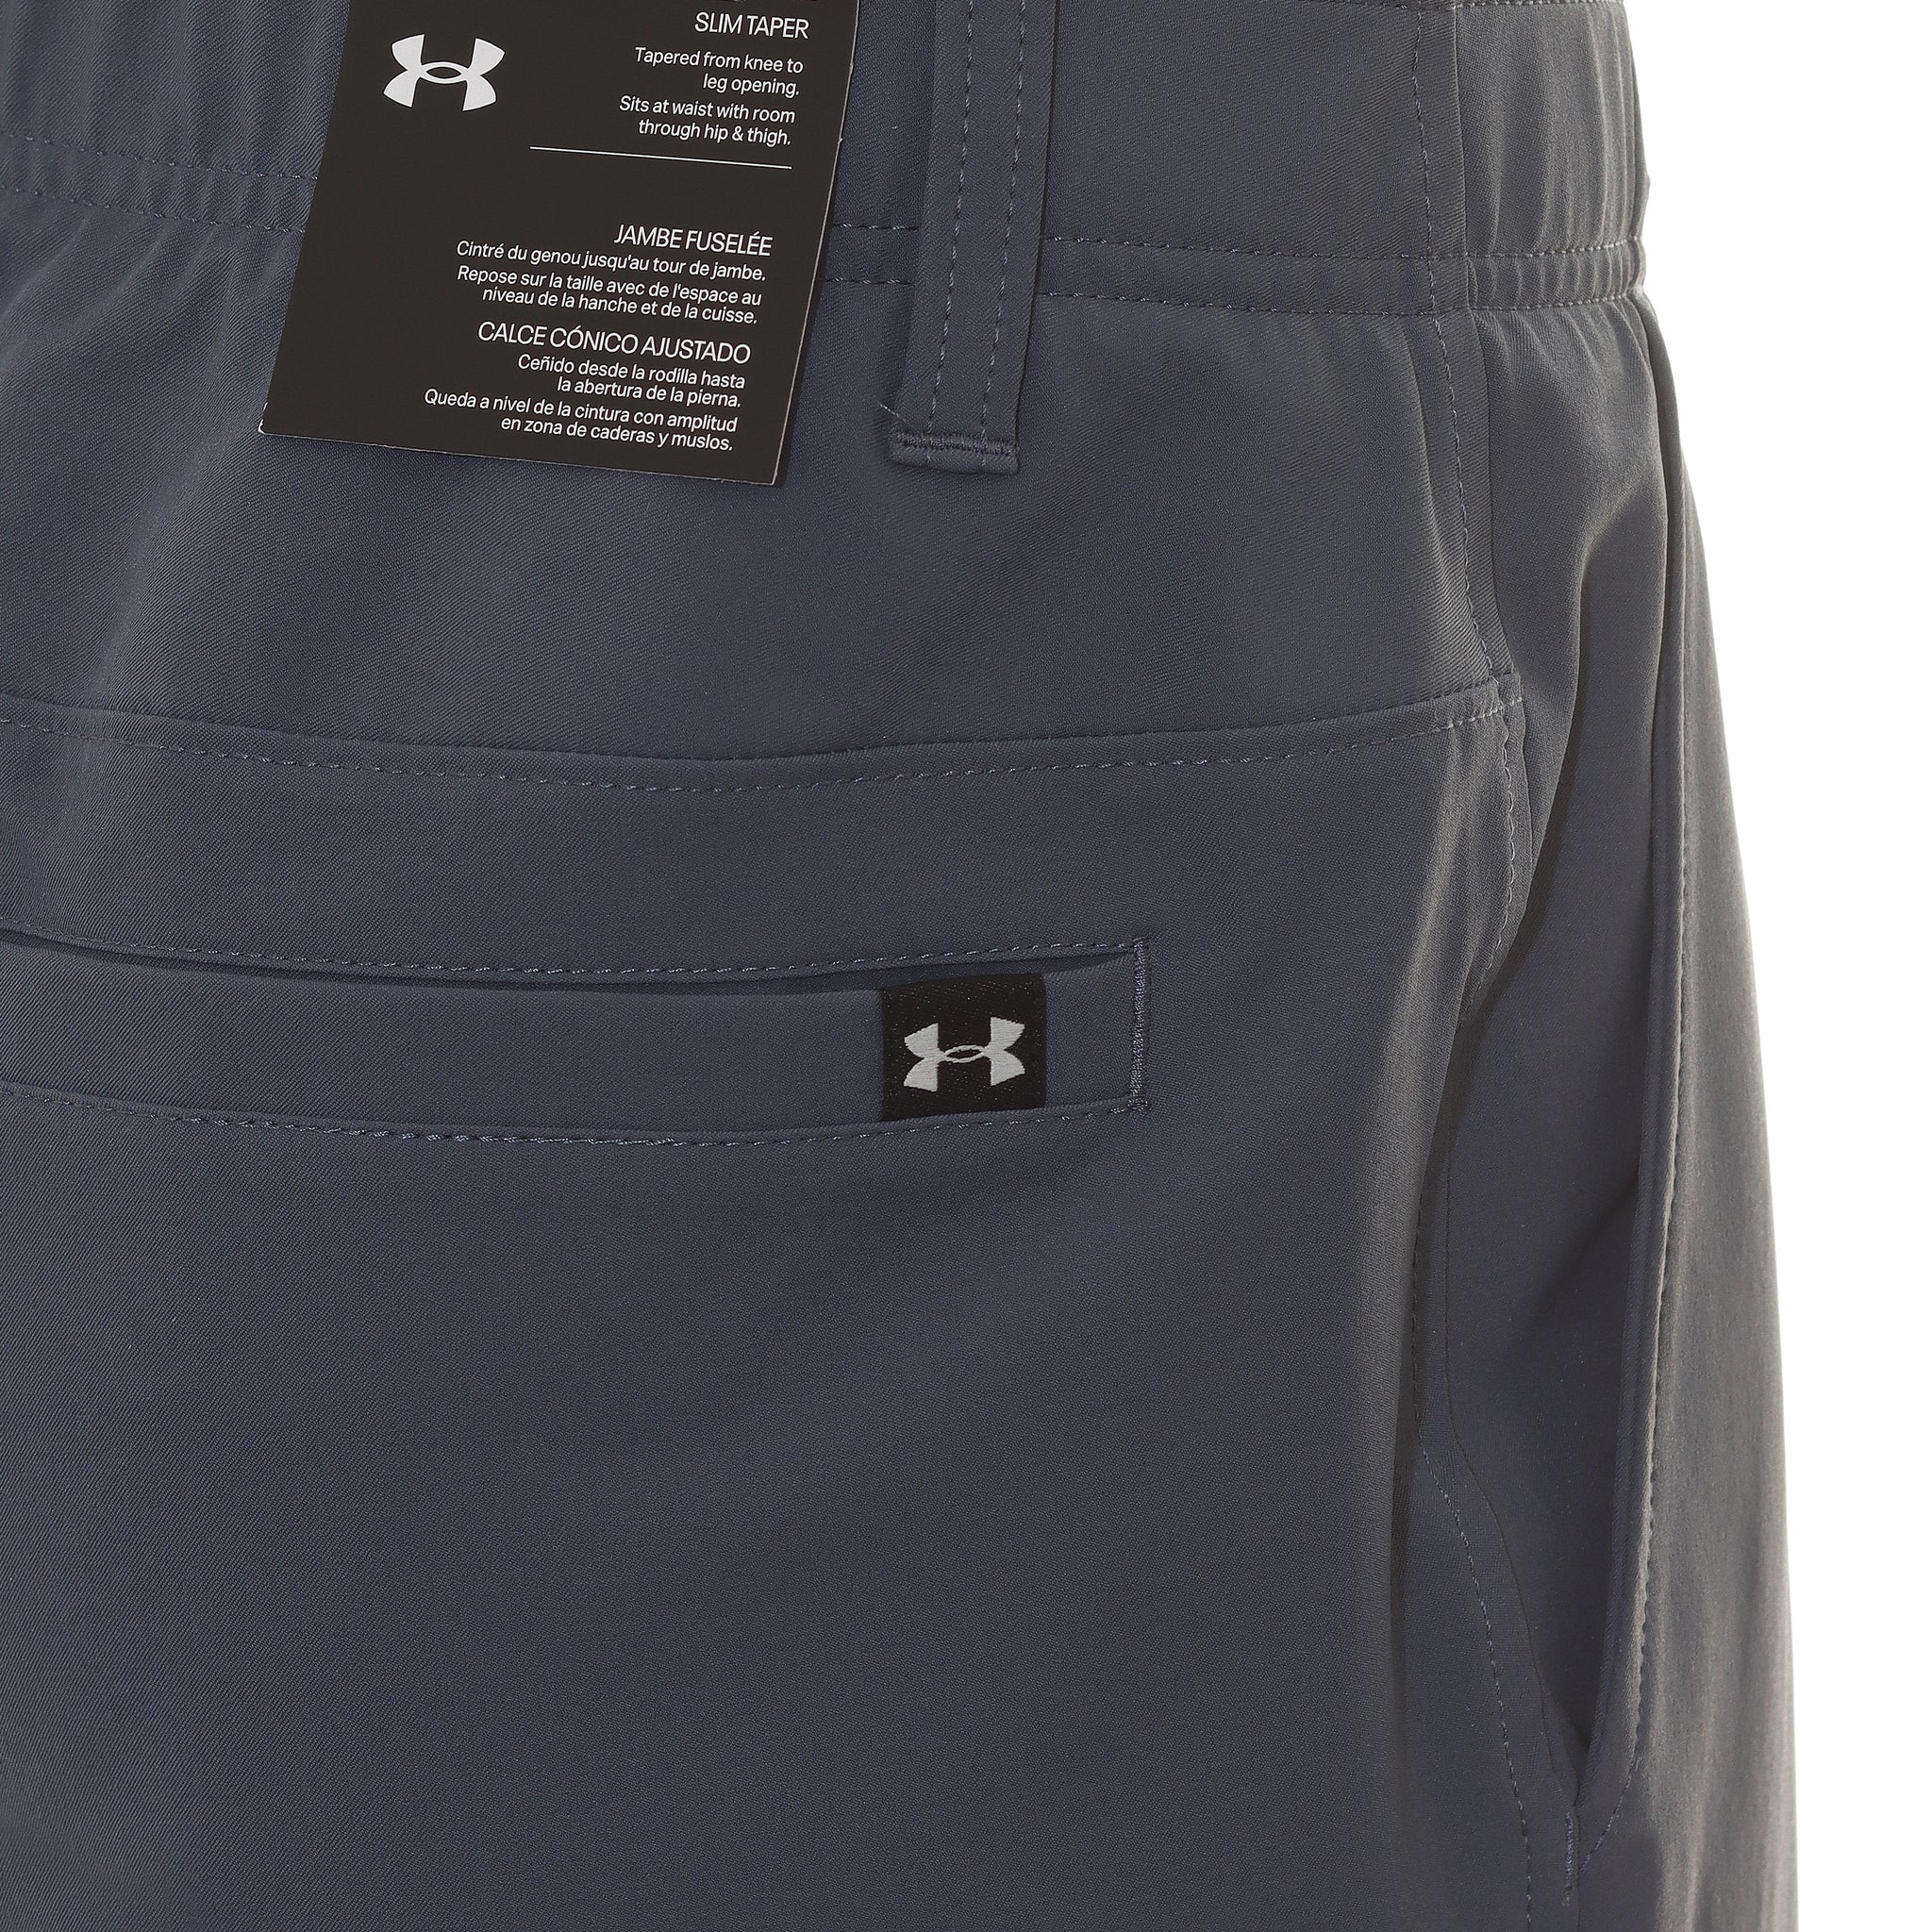 under-armour-golf-ua-drive-slim-tapered-pants-1364410-downpour-044